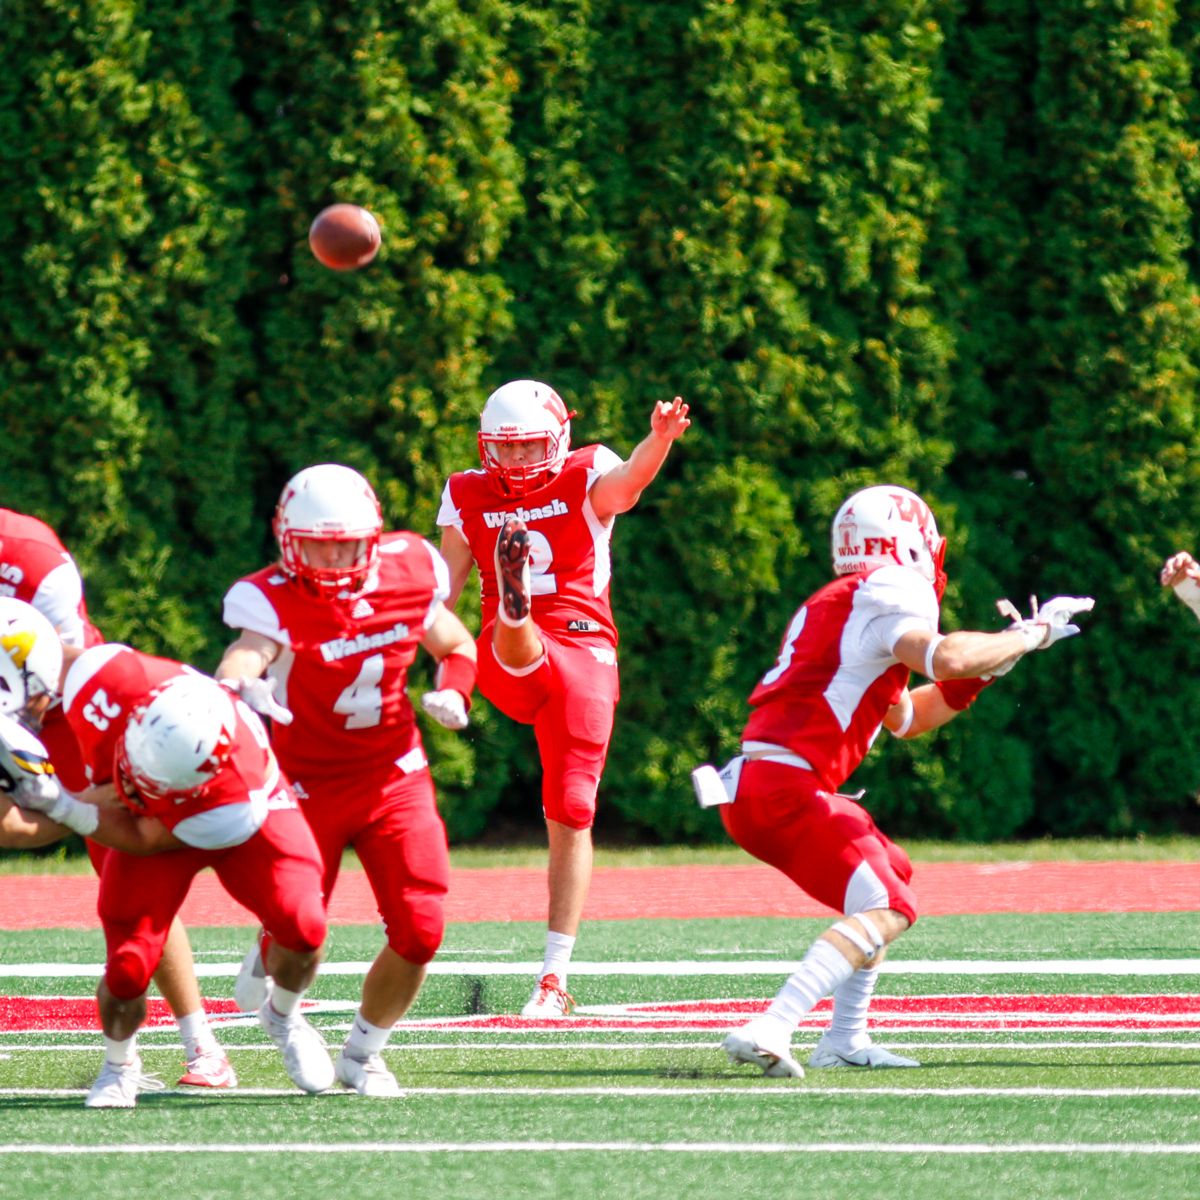 Joey Annee ’22 asserted himself early as one of the top punters in Division III football.